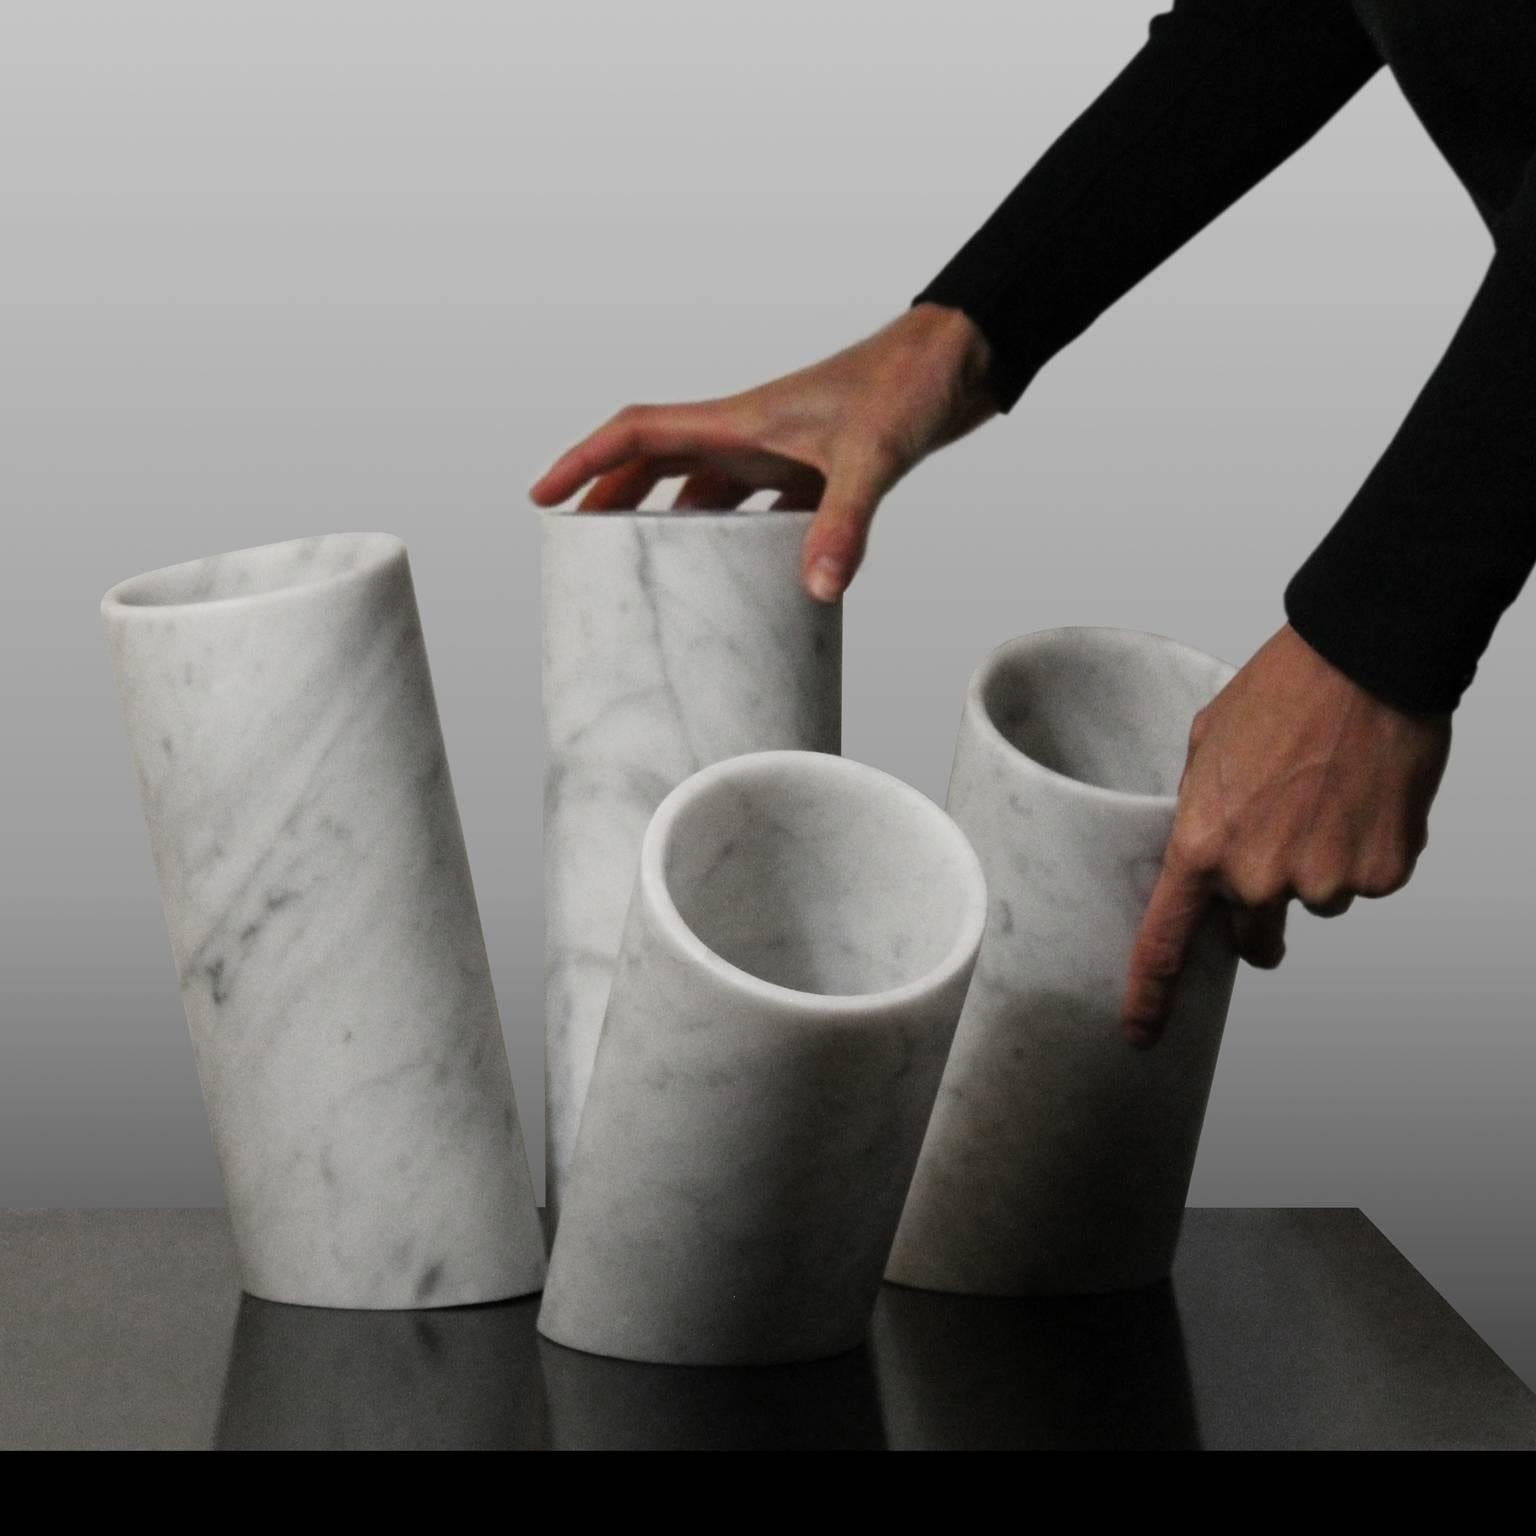 Limited edition of nine hand-carved vases. The configuration of these four elements is inspired by the loss of balance, making a naturally static material dynamic.